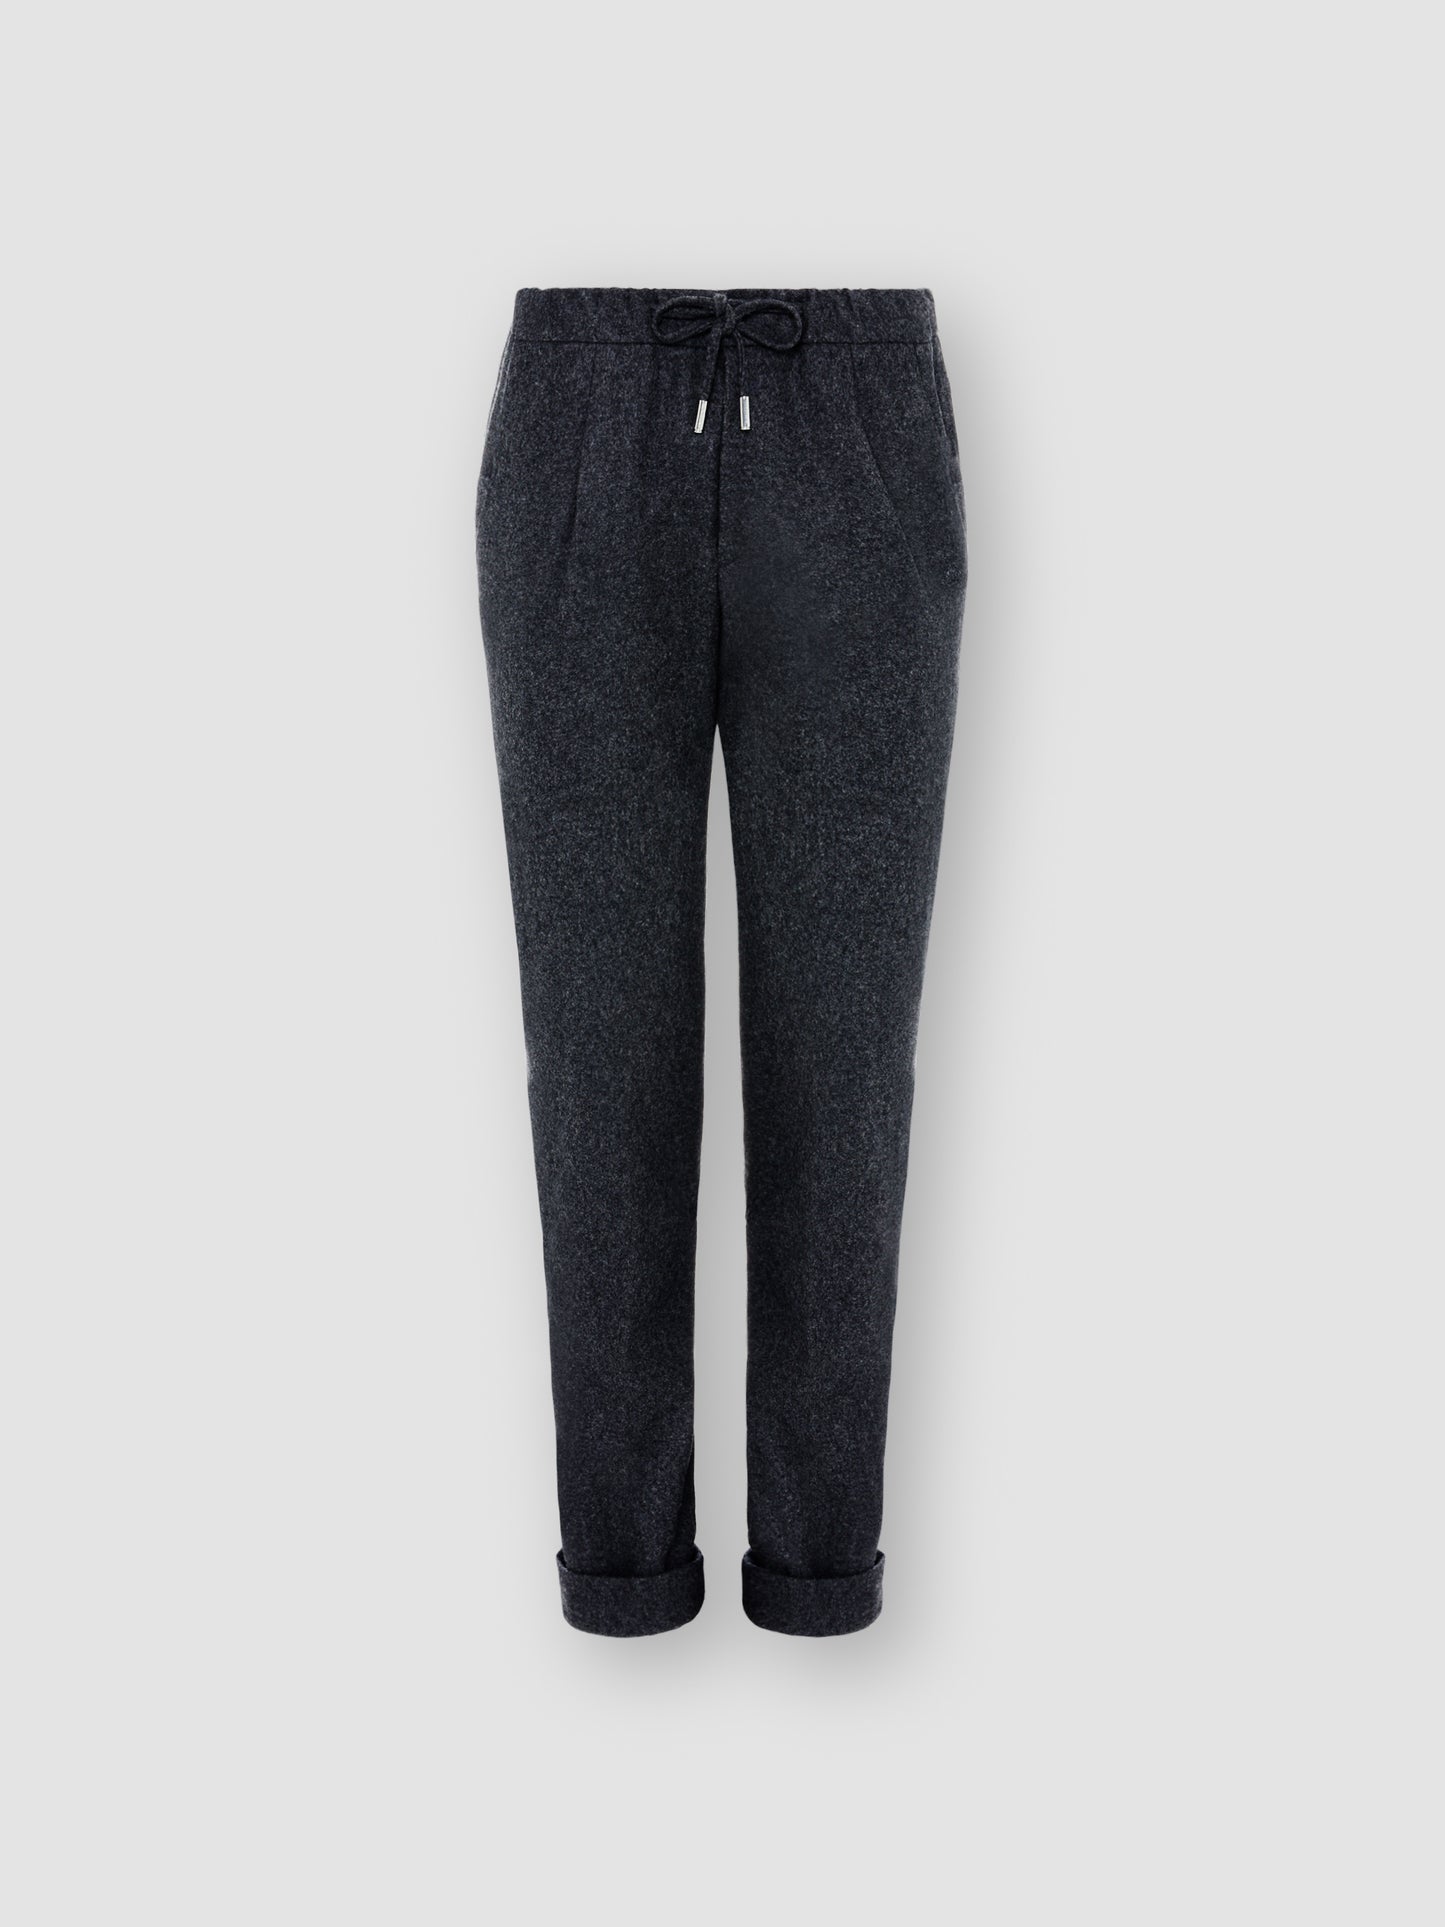 Flannel Casual Tailored Trousers Charcoal Product Image